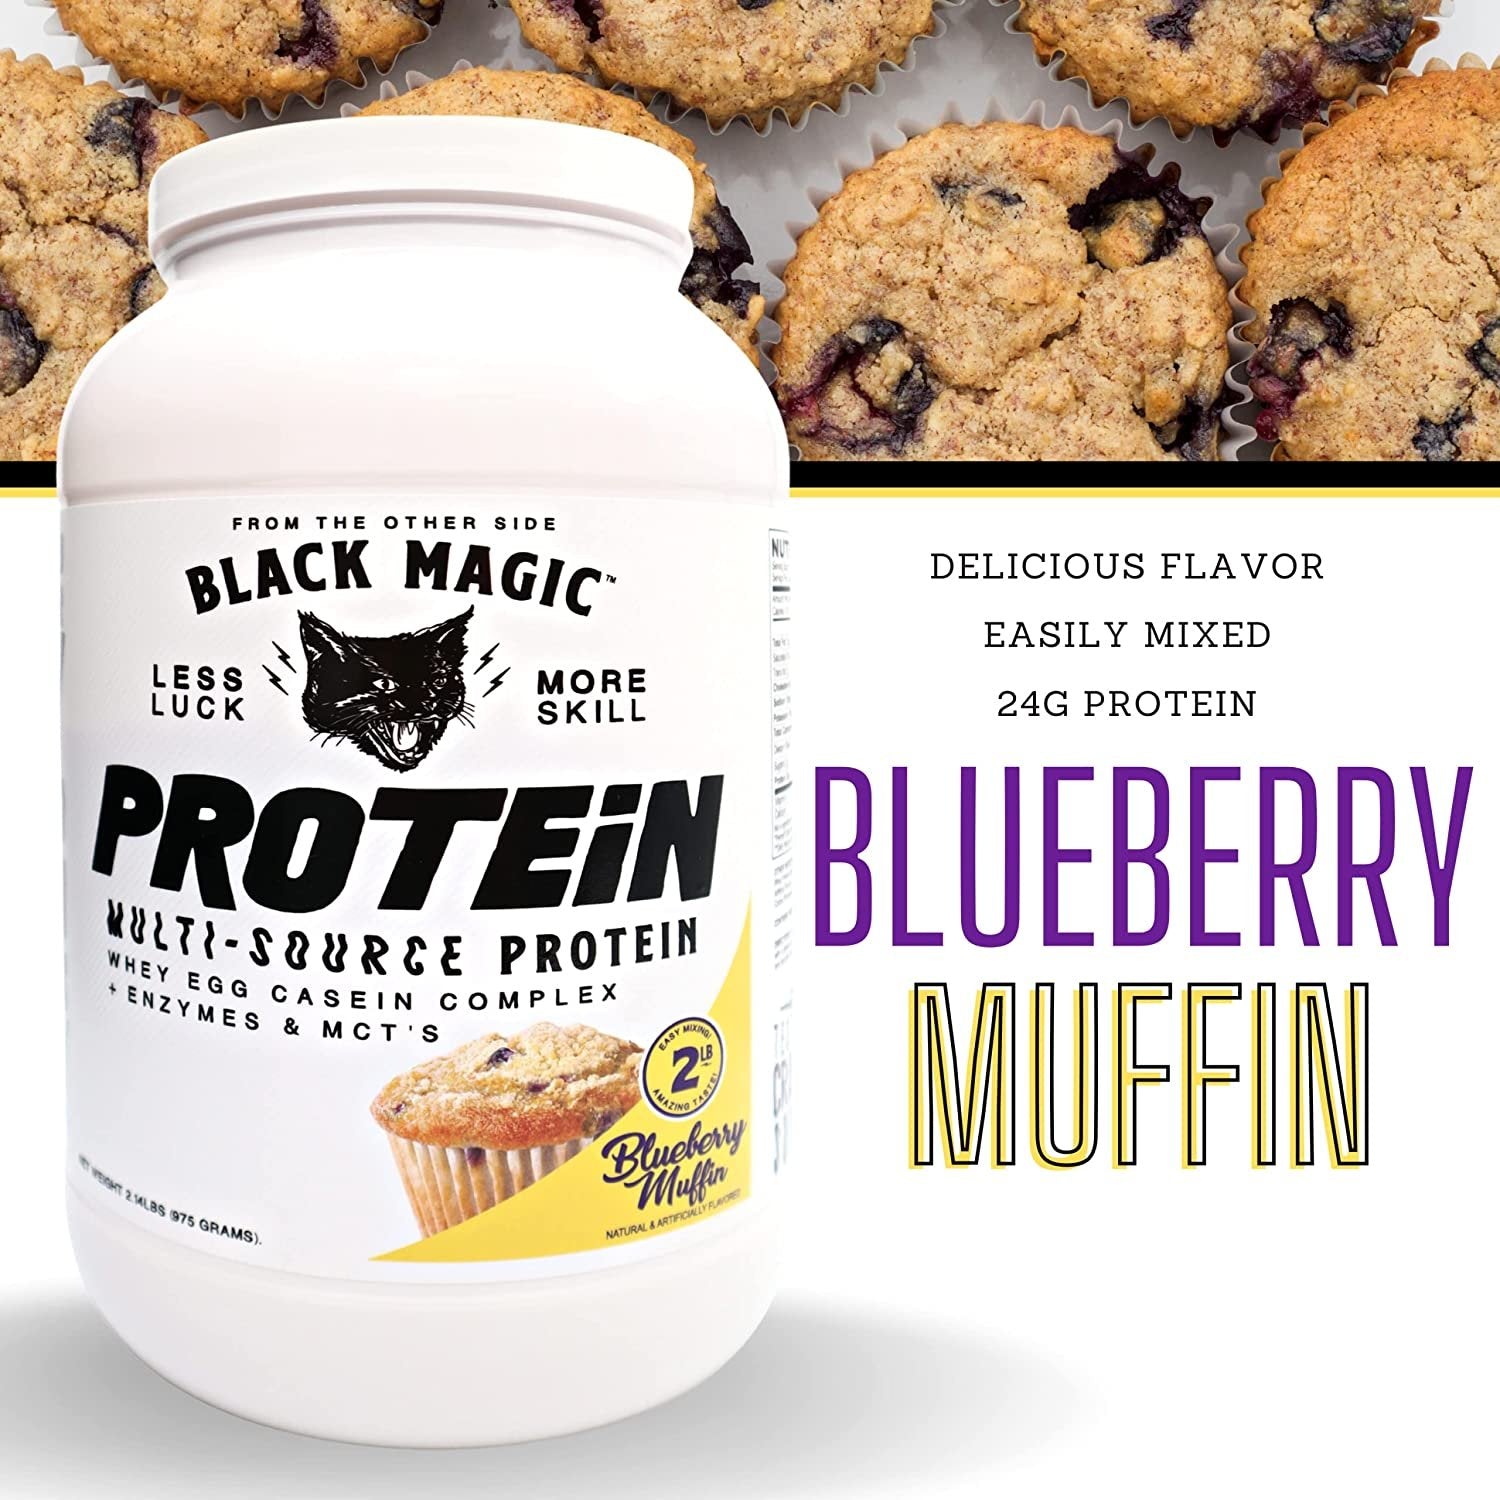 Blue Muffin Black Magic Multi-Source Protein - Whey, Egg, and Casein Complex with Enzymes & MCT Powder - Pre Workout and Post Workout - 24g Protein - 2 LB with Bonus Key Chain